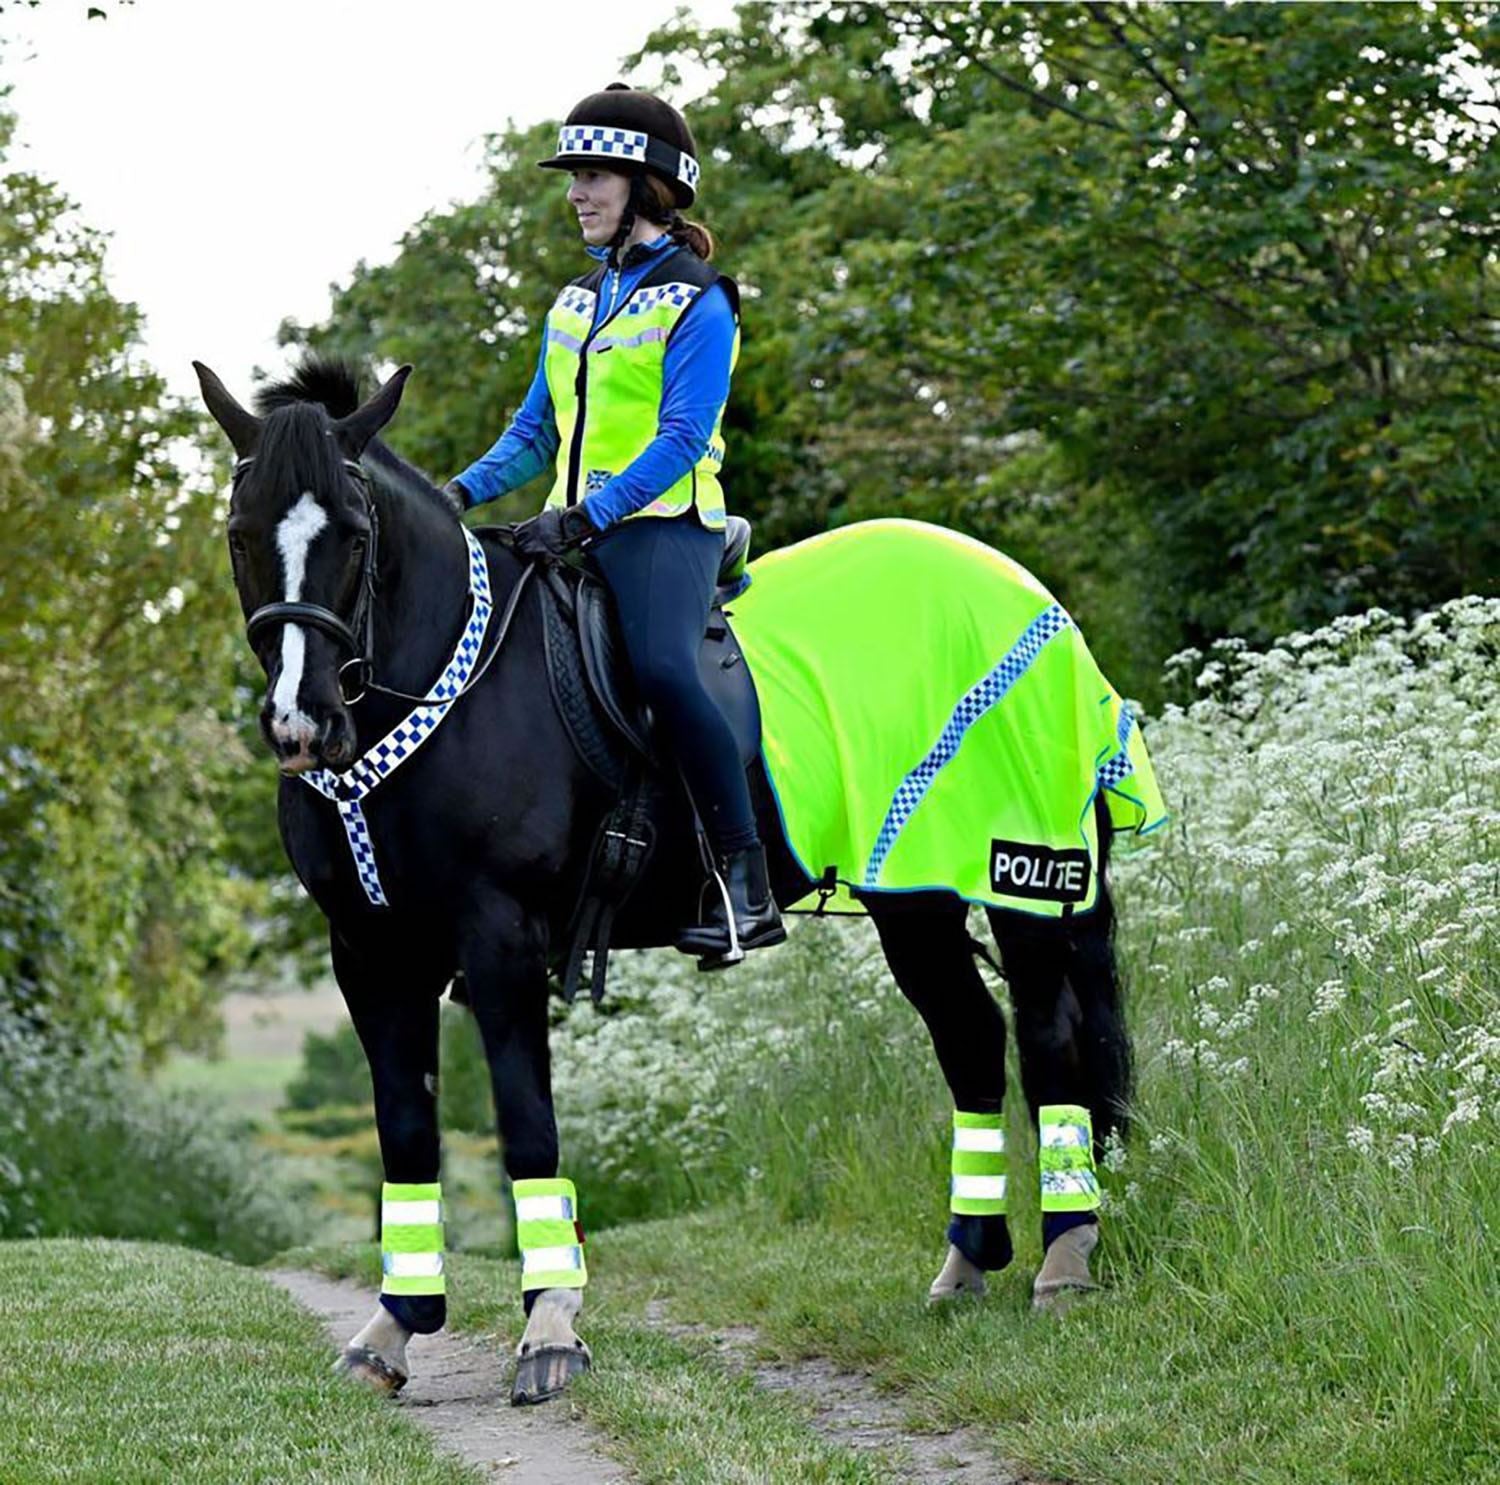 Equisafety Polite Breathable Mesh Quarter Sheet - Just Horse Riders